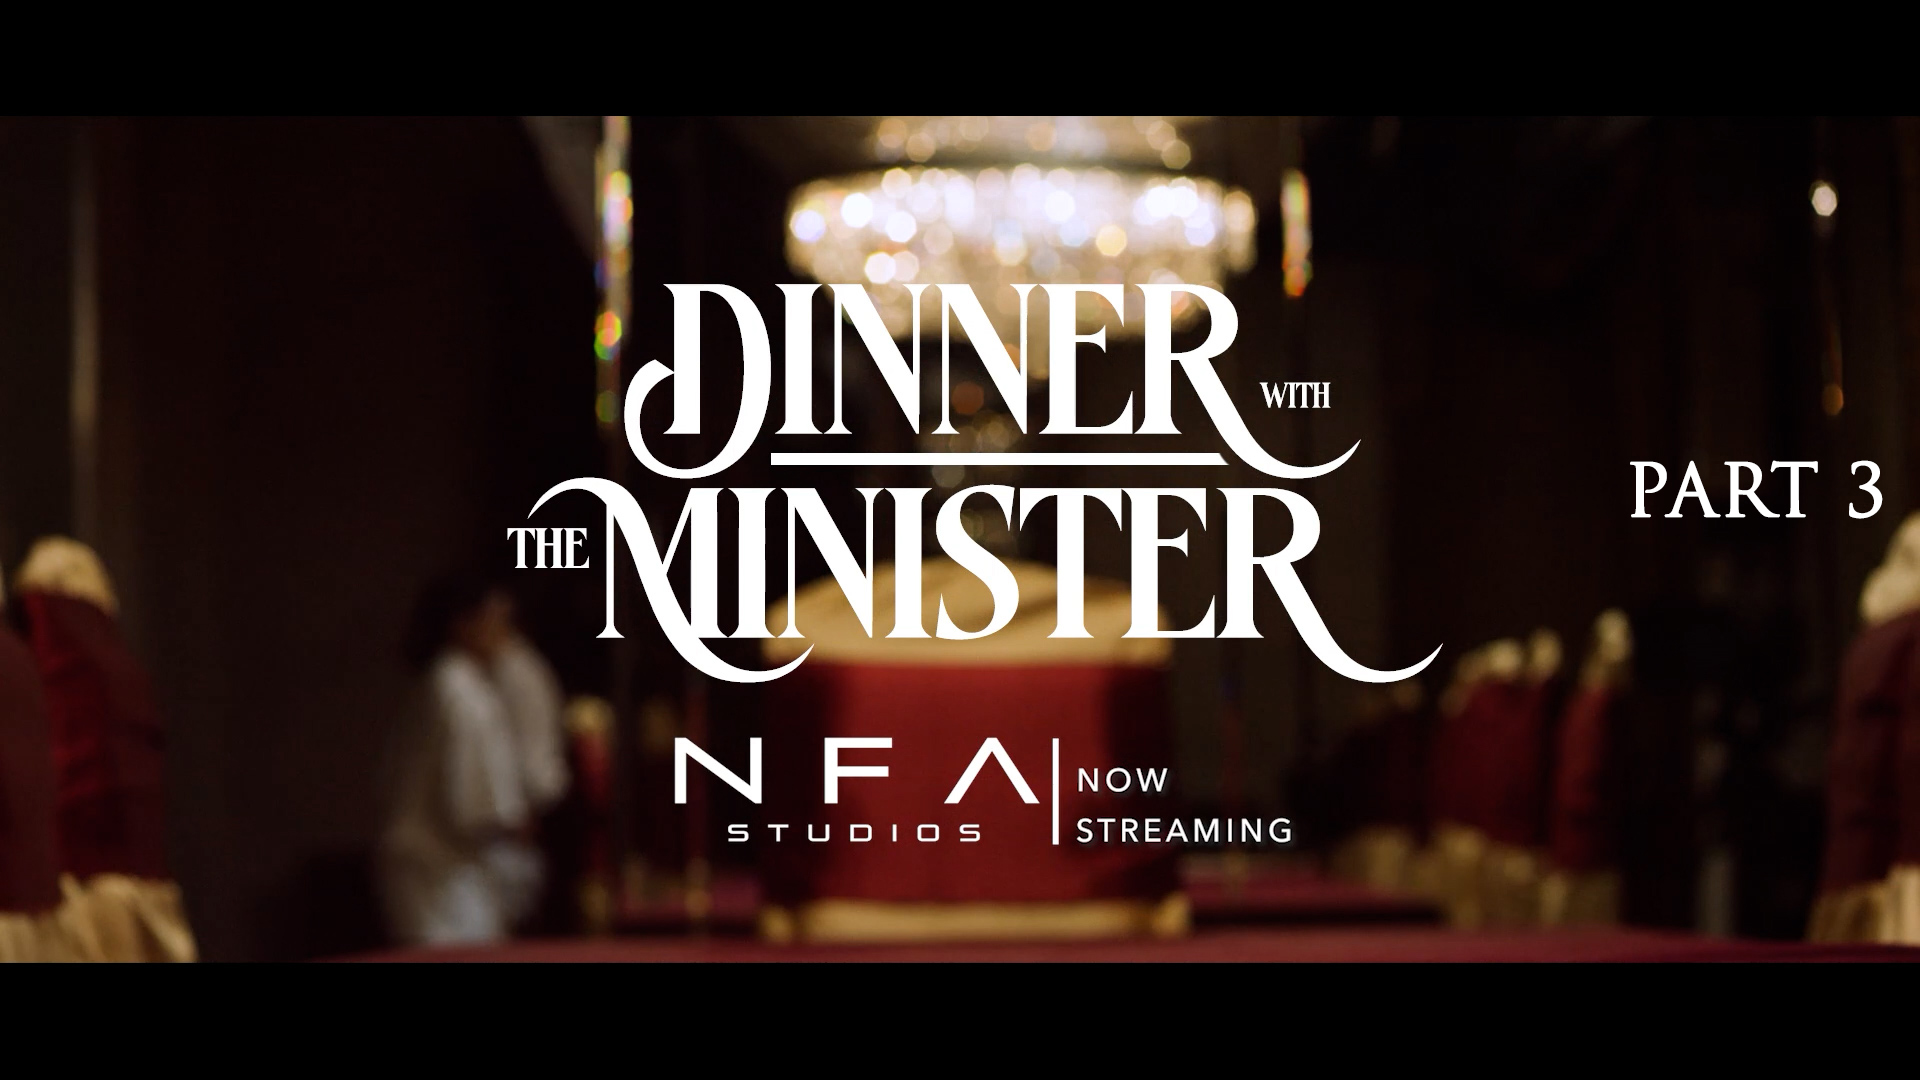 Part 3: NFA Studios presents Dinner with The Minister